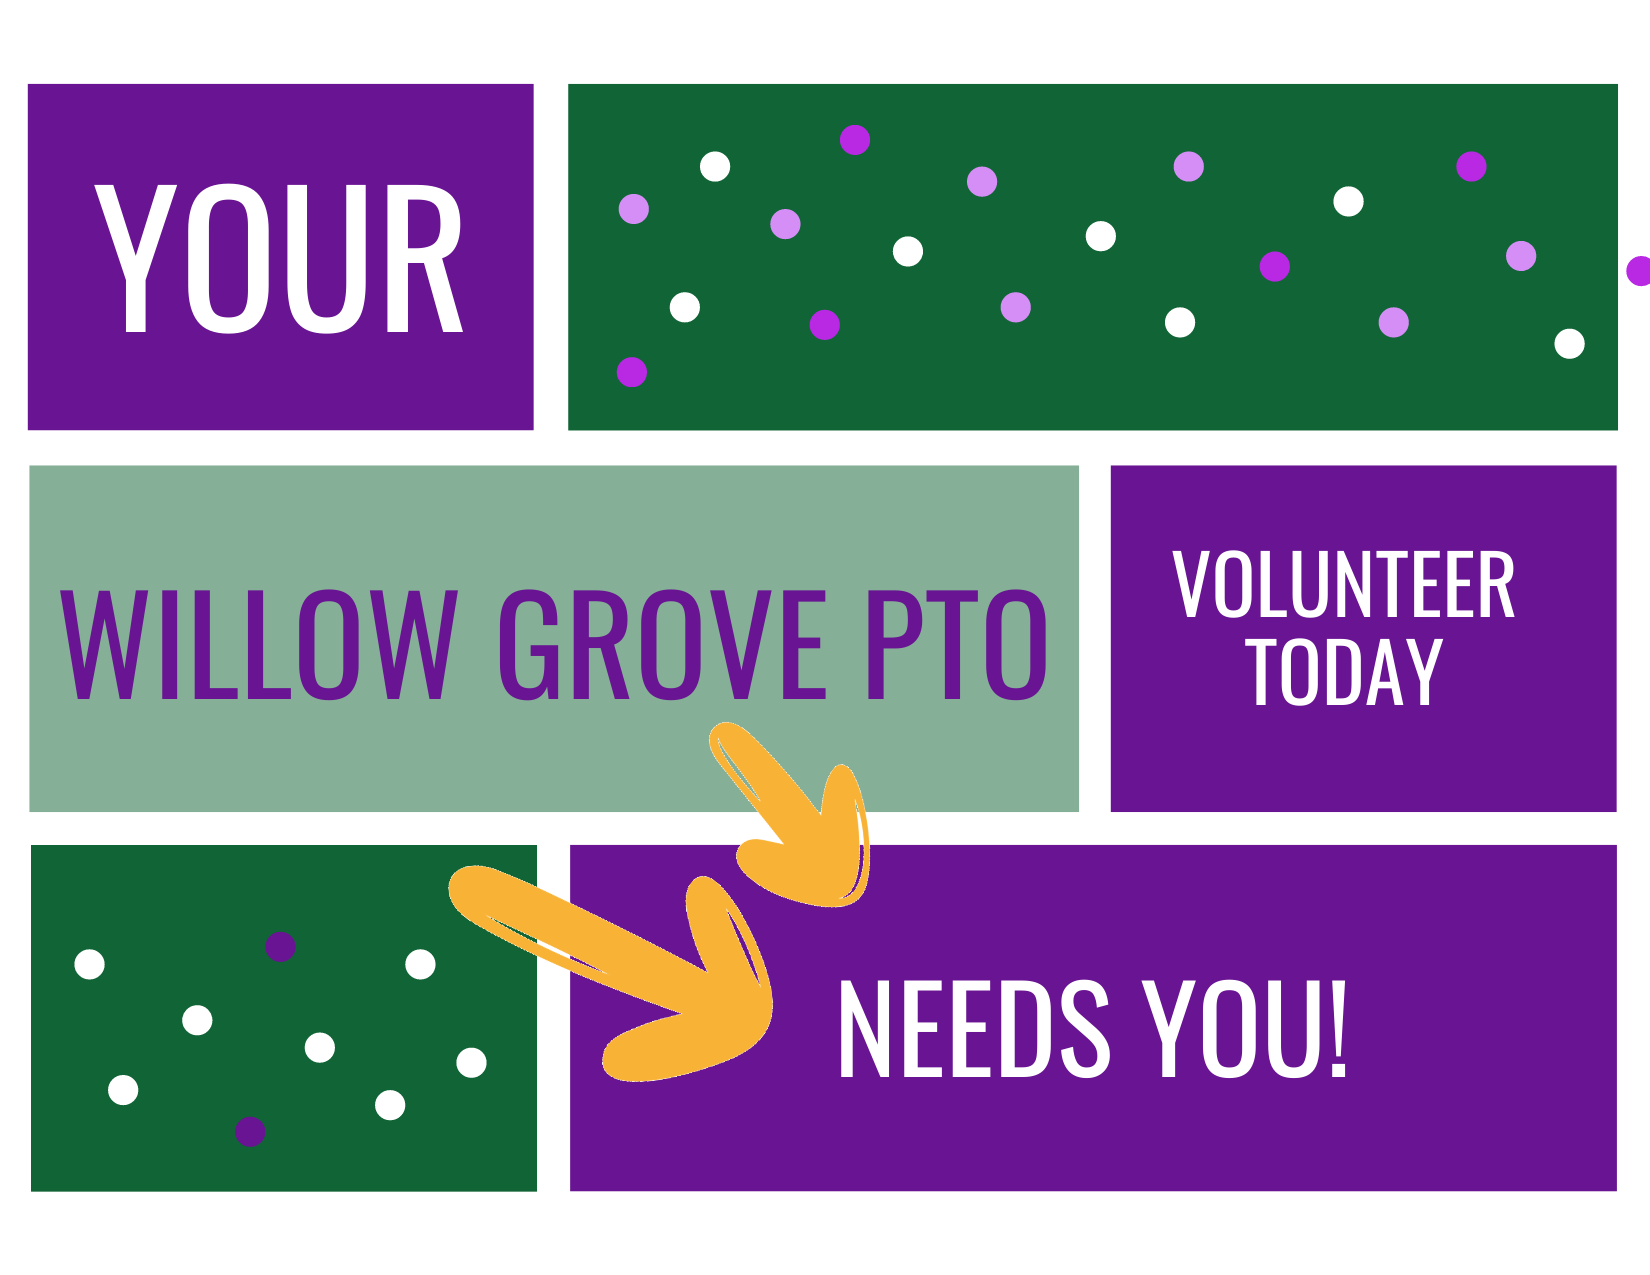 Willow Grove PTO Needs You today